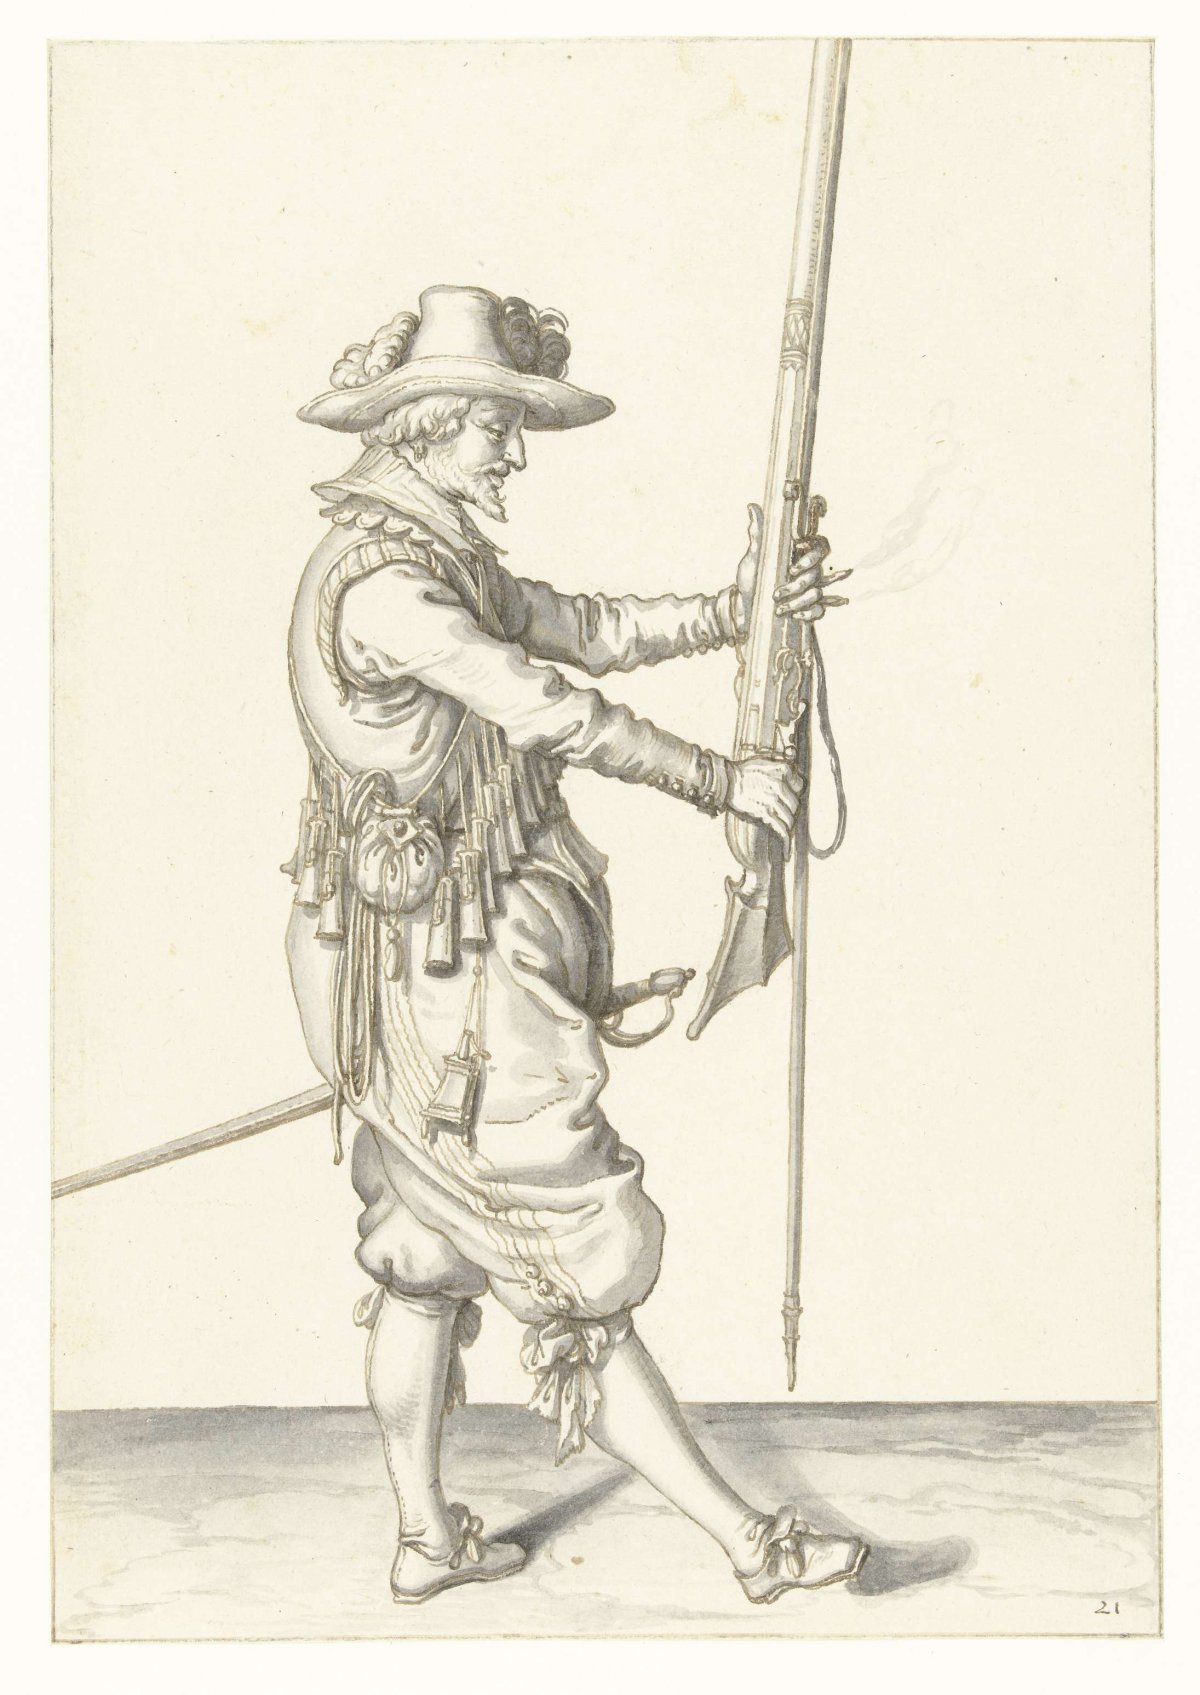 Soldier holding his musket with both hands upright in front of him, Jacques de Gheyn (II), 1596 - 1606